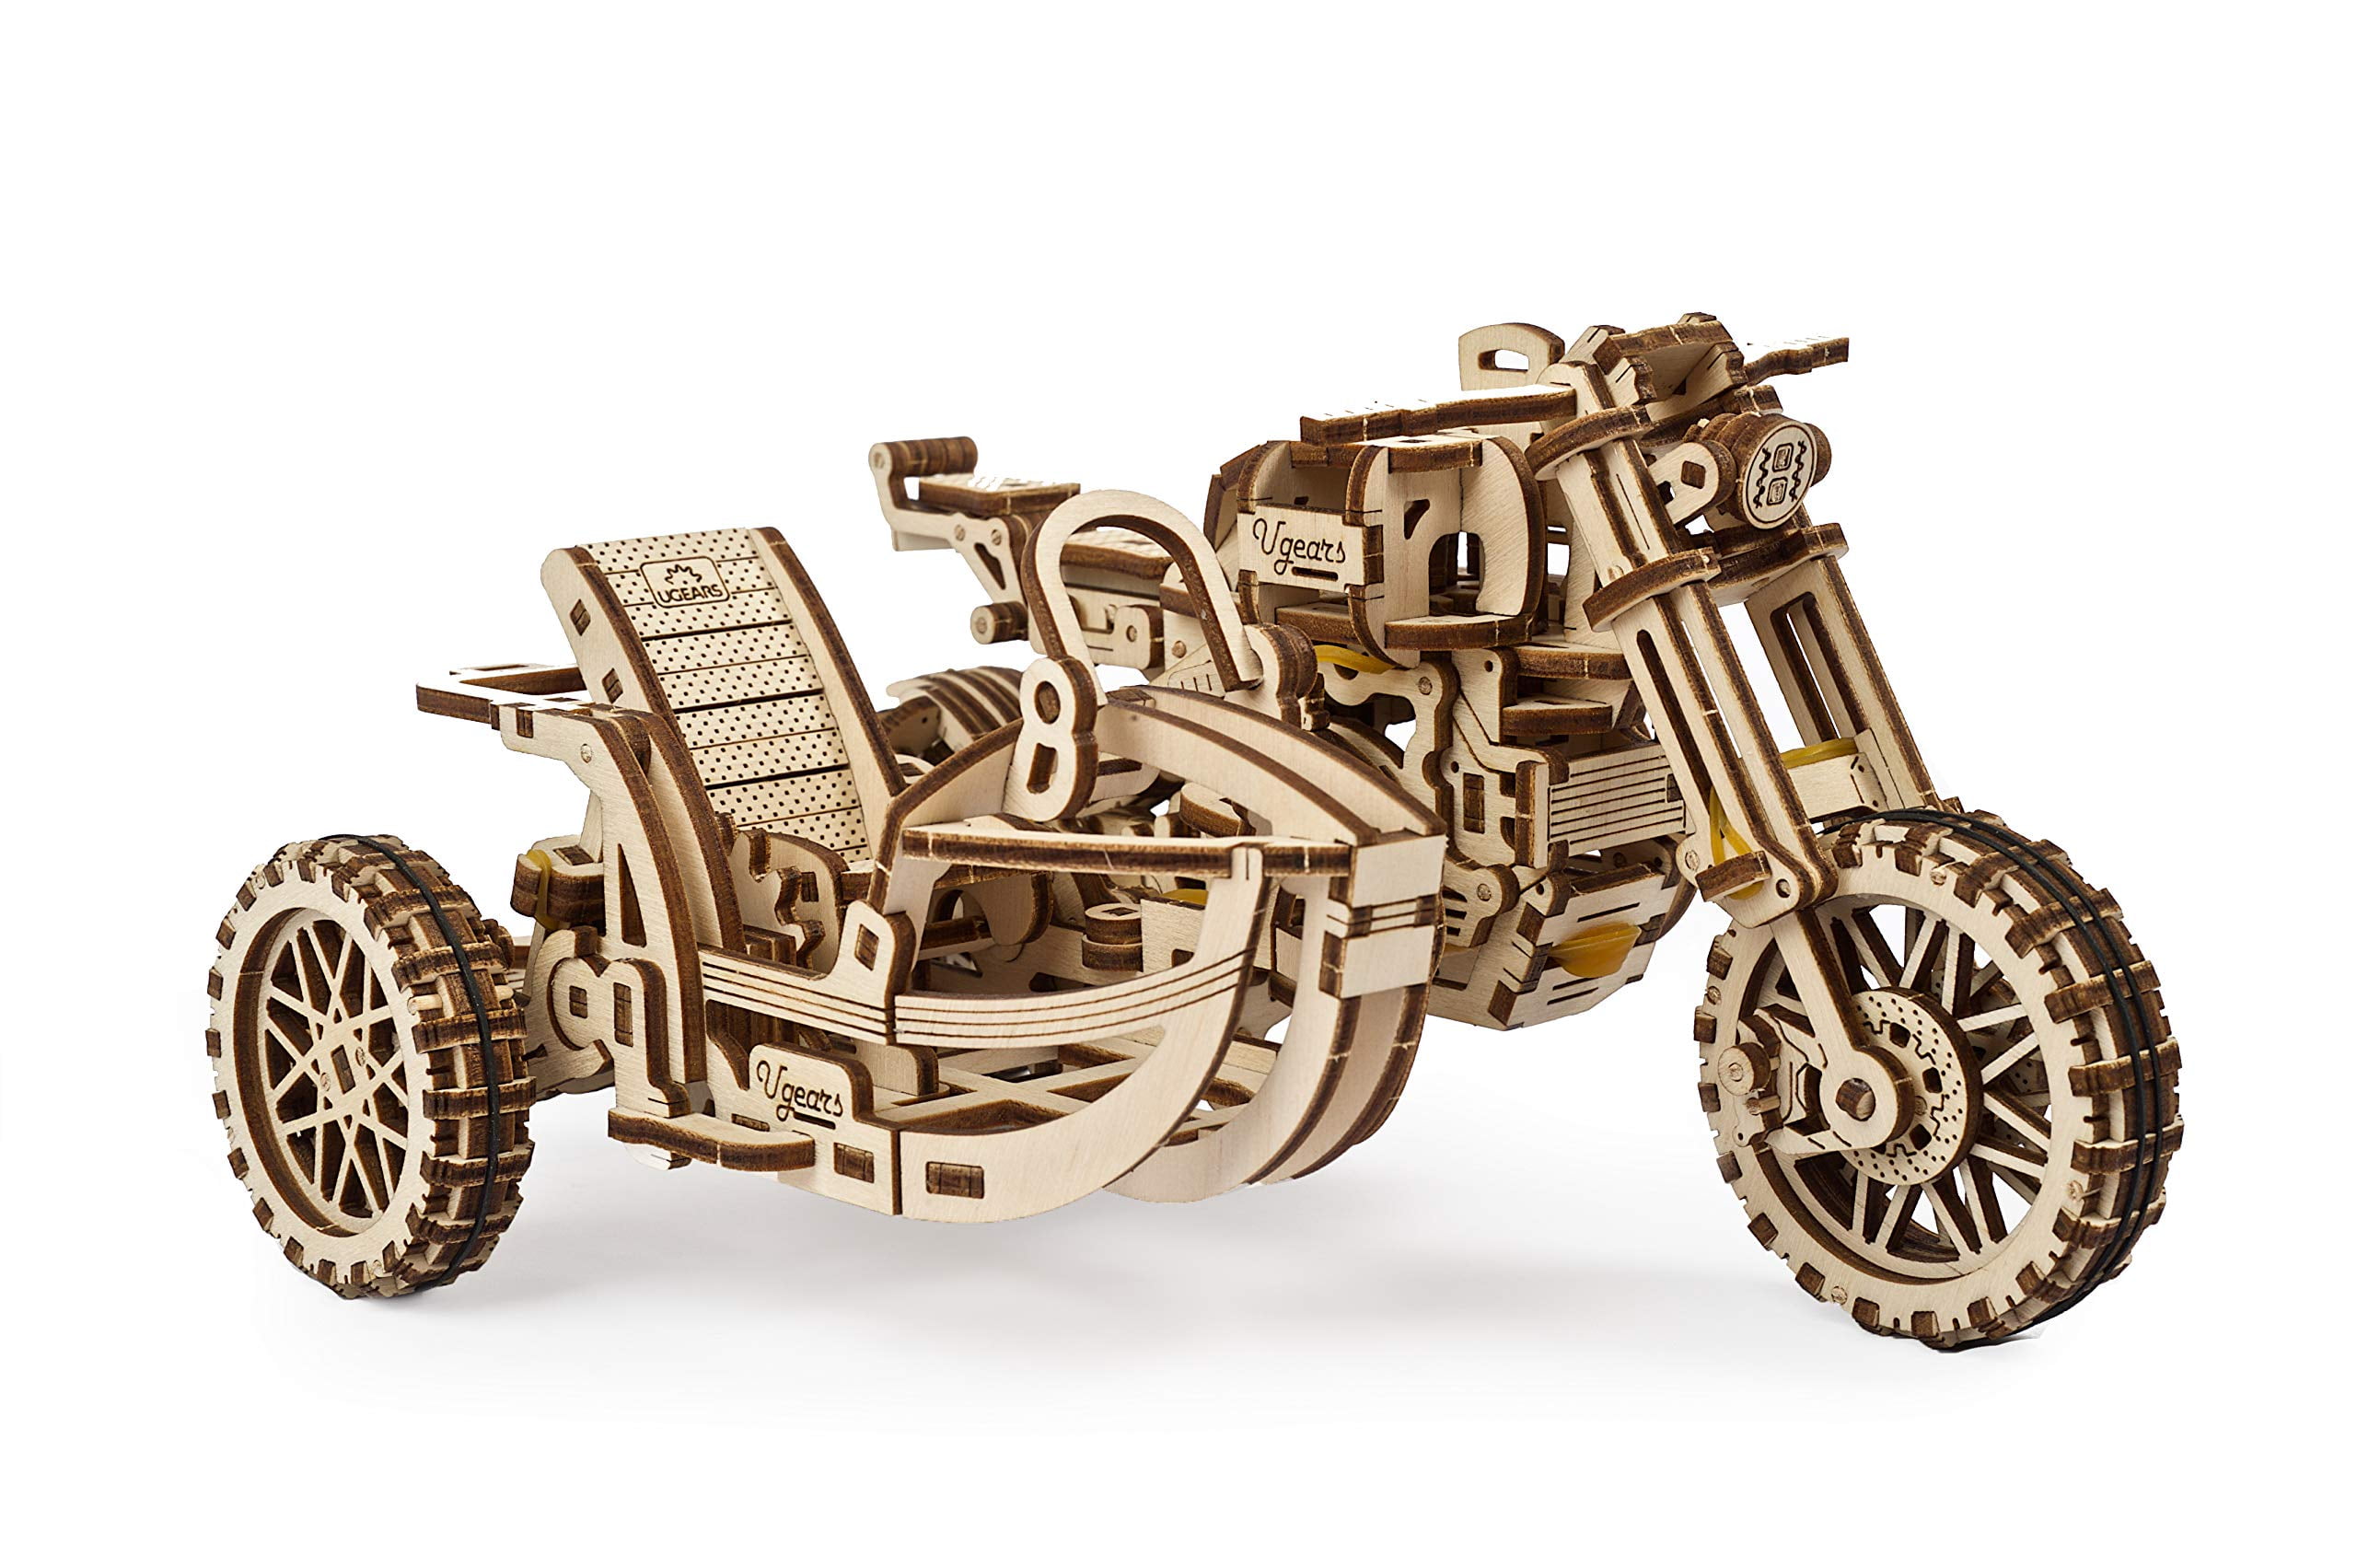 Novelty 3D Jigsaw Motorbike Model Wood Craft Kit Wooden Puzzle Learning Toy N7 